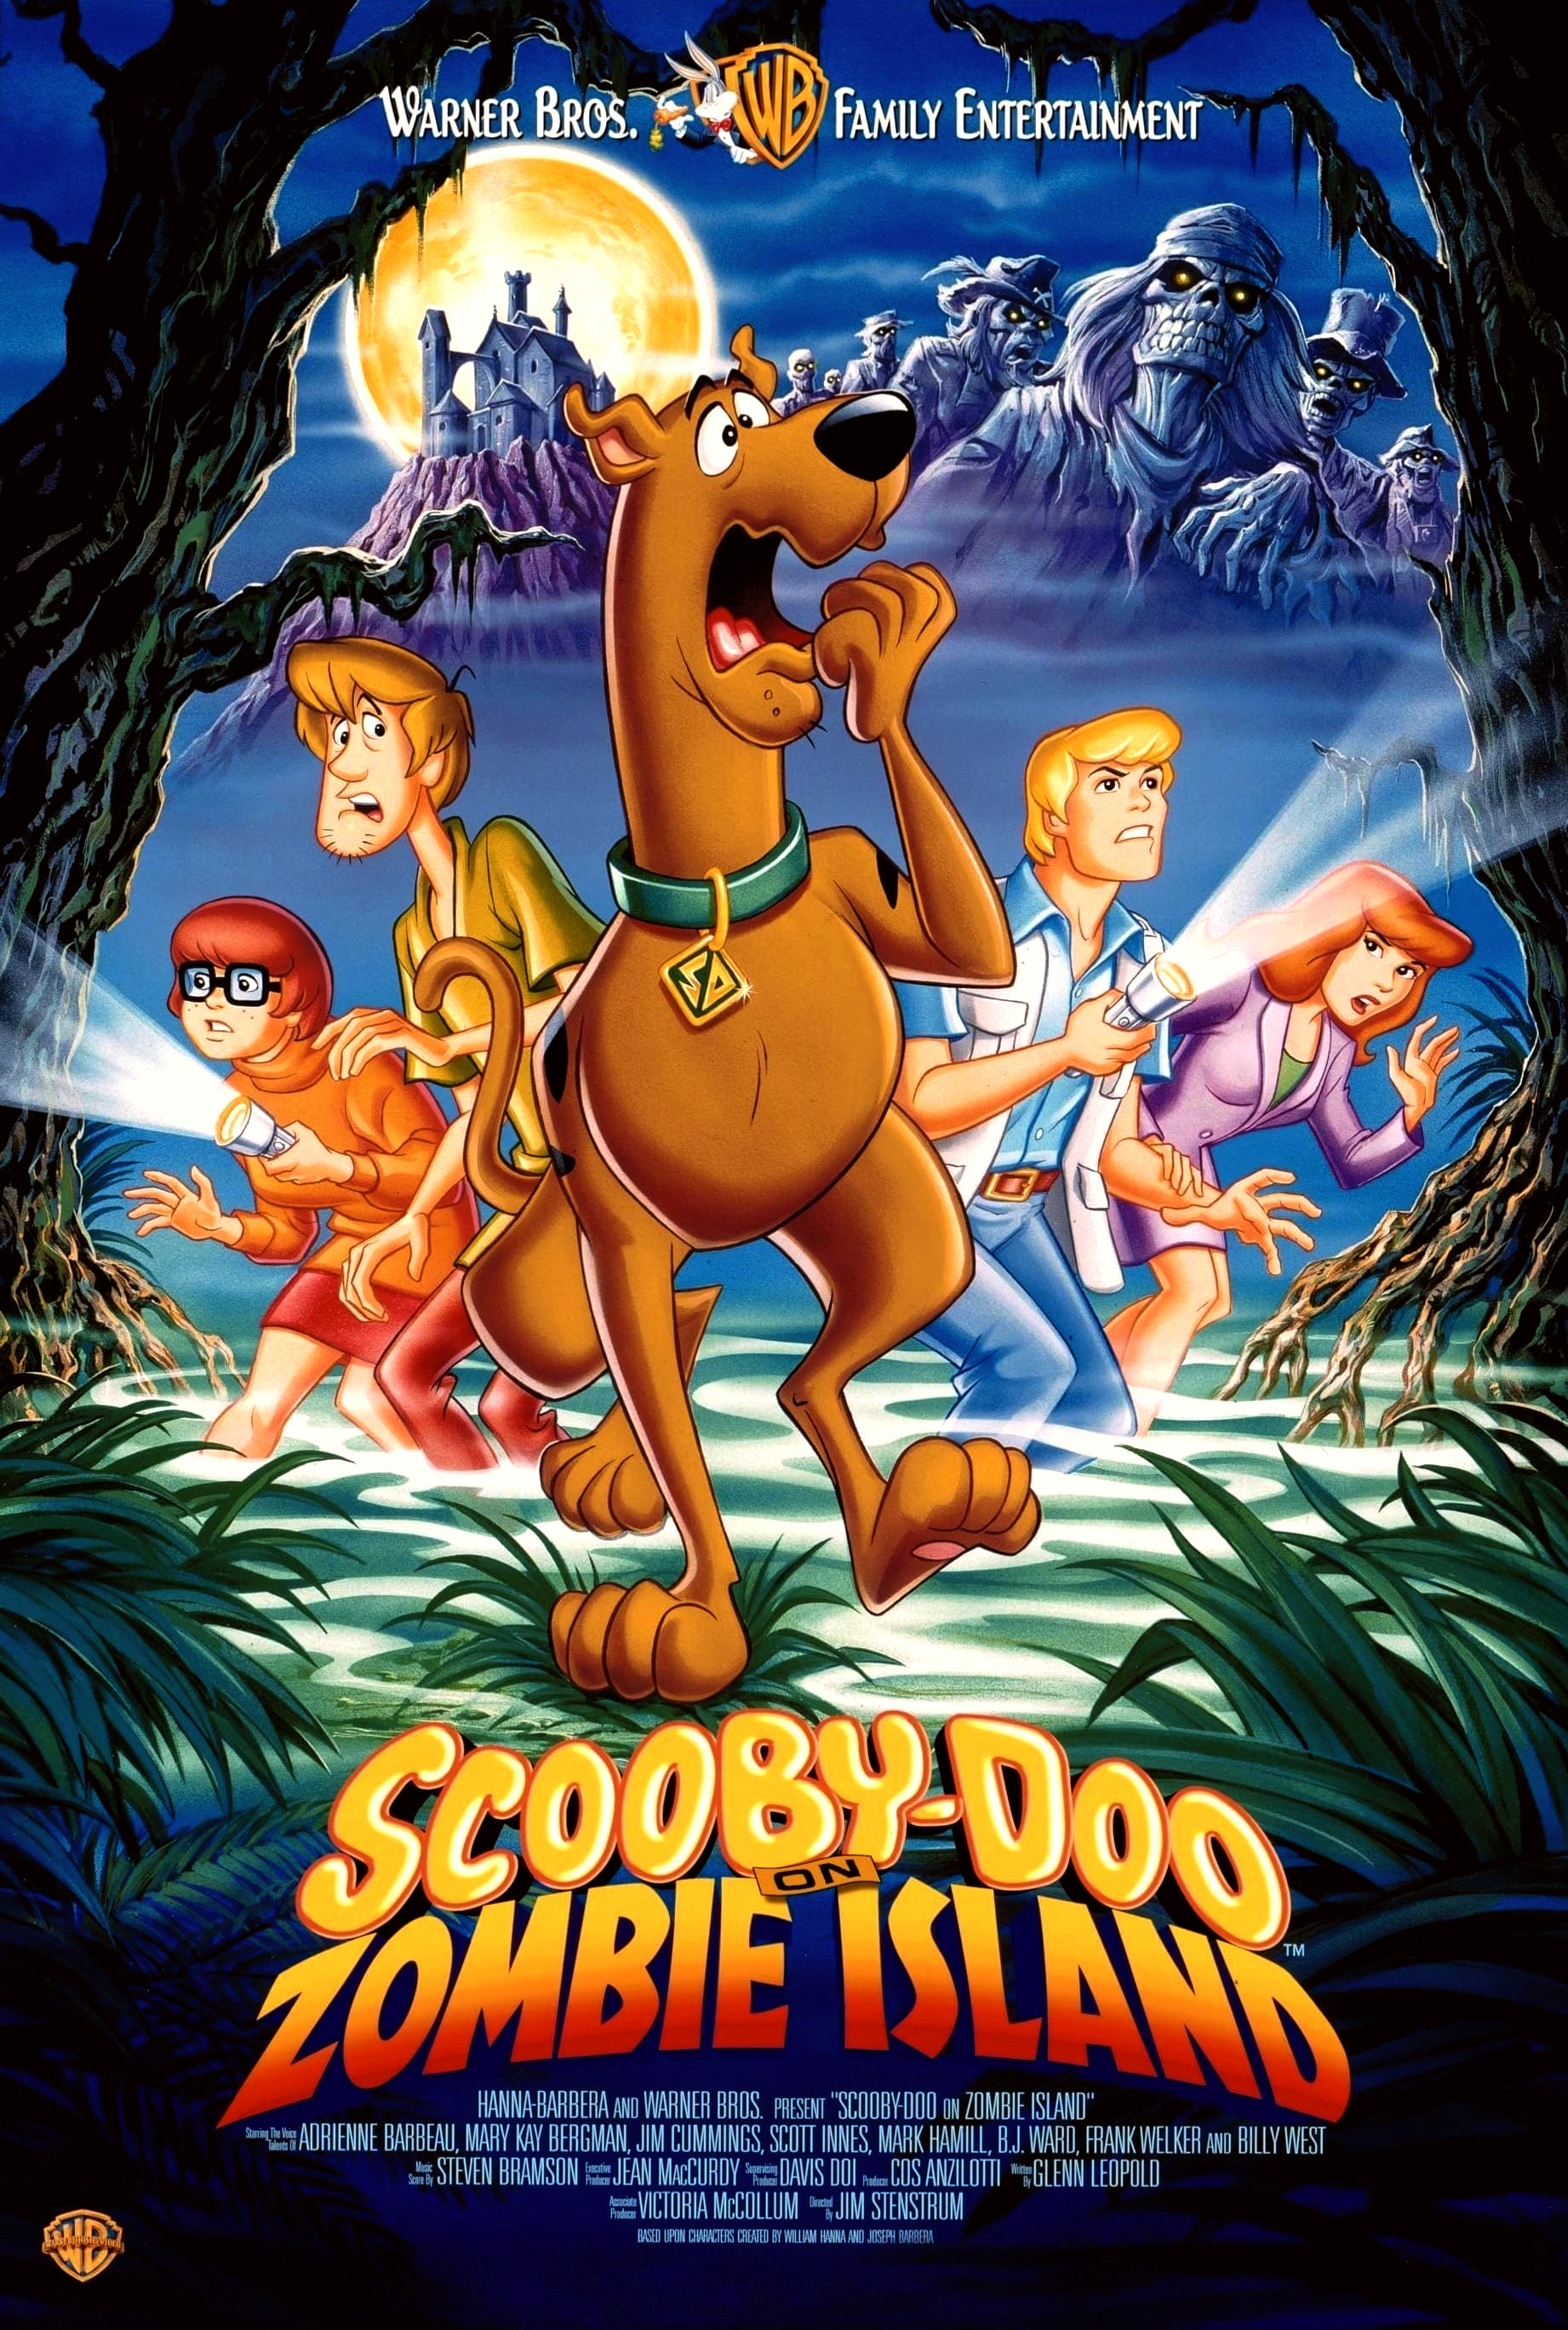 asif nazrul recommends Scooby Doo Porn Movie